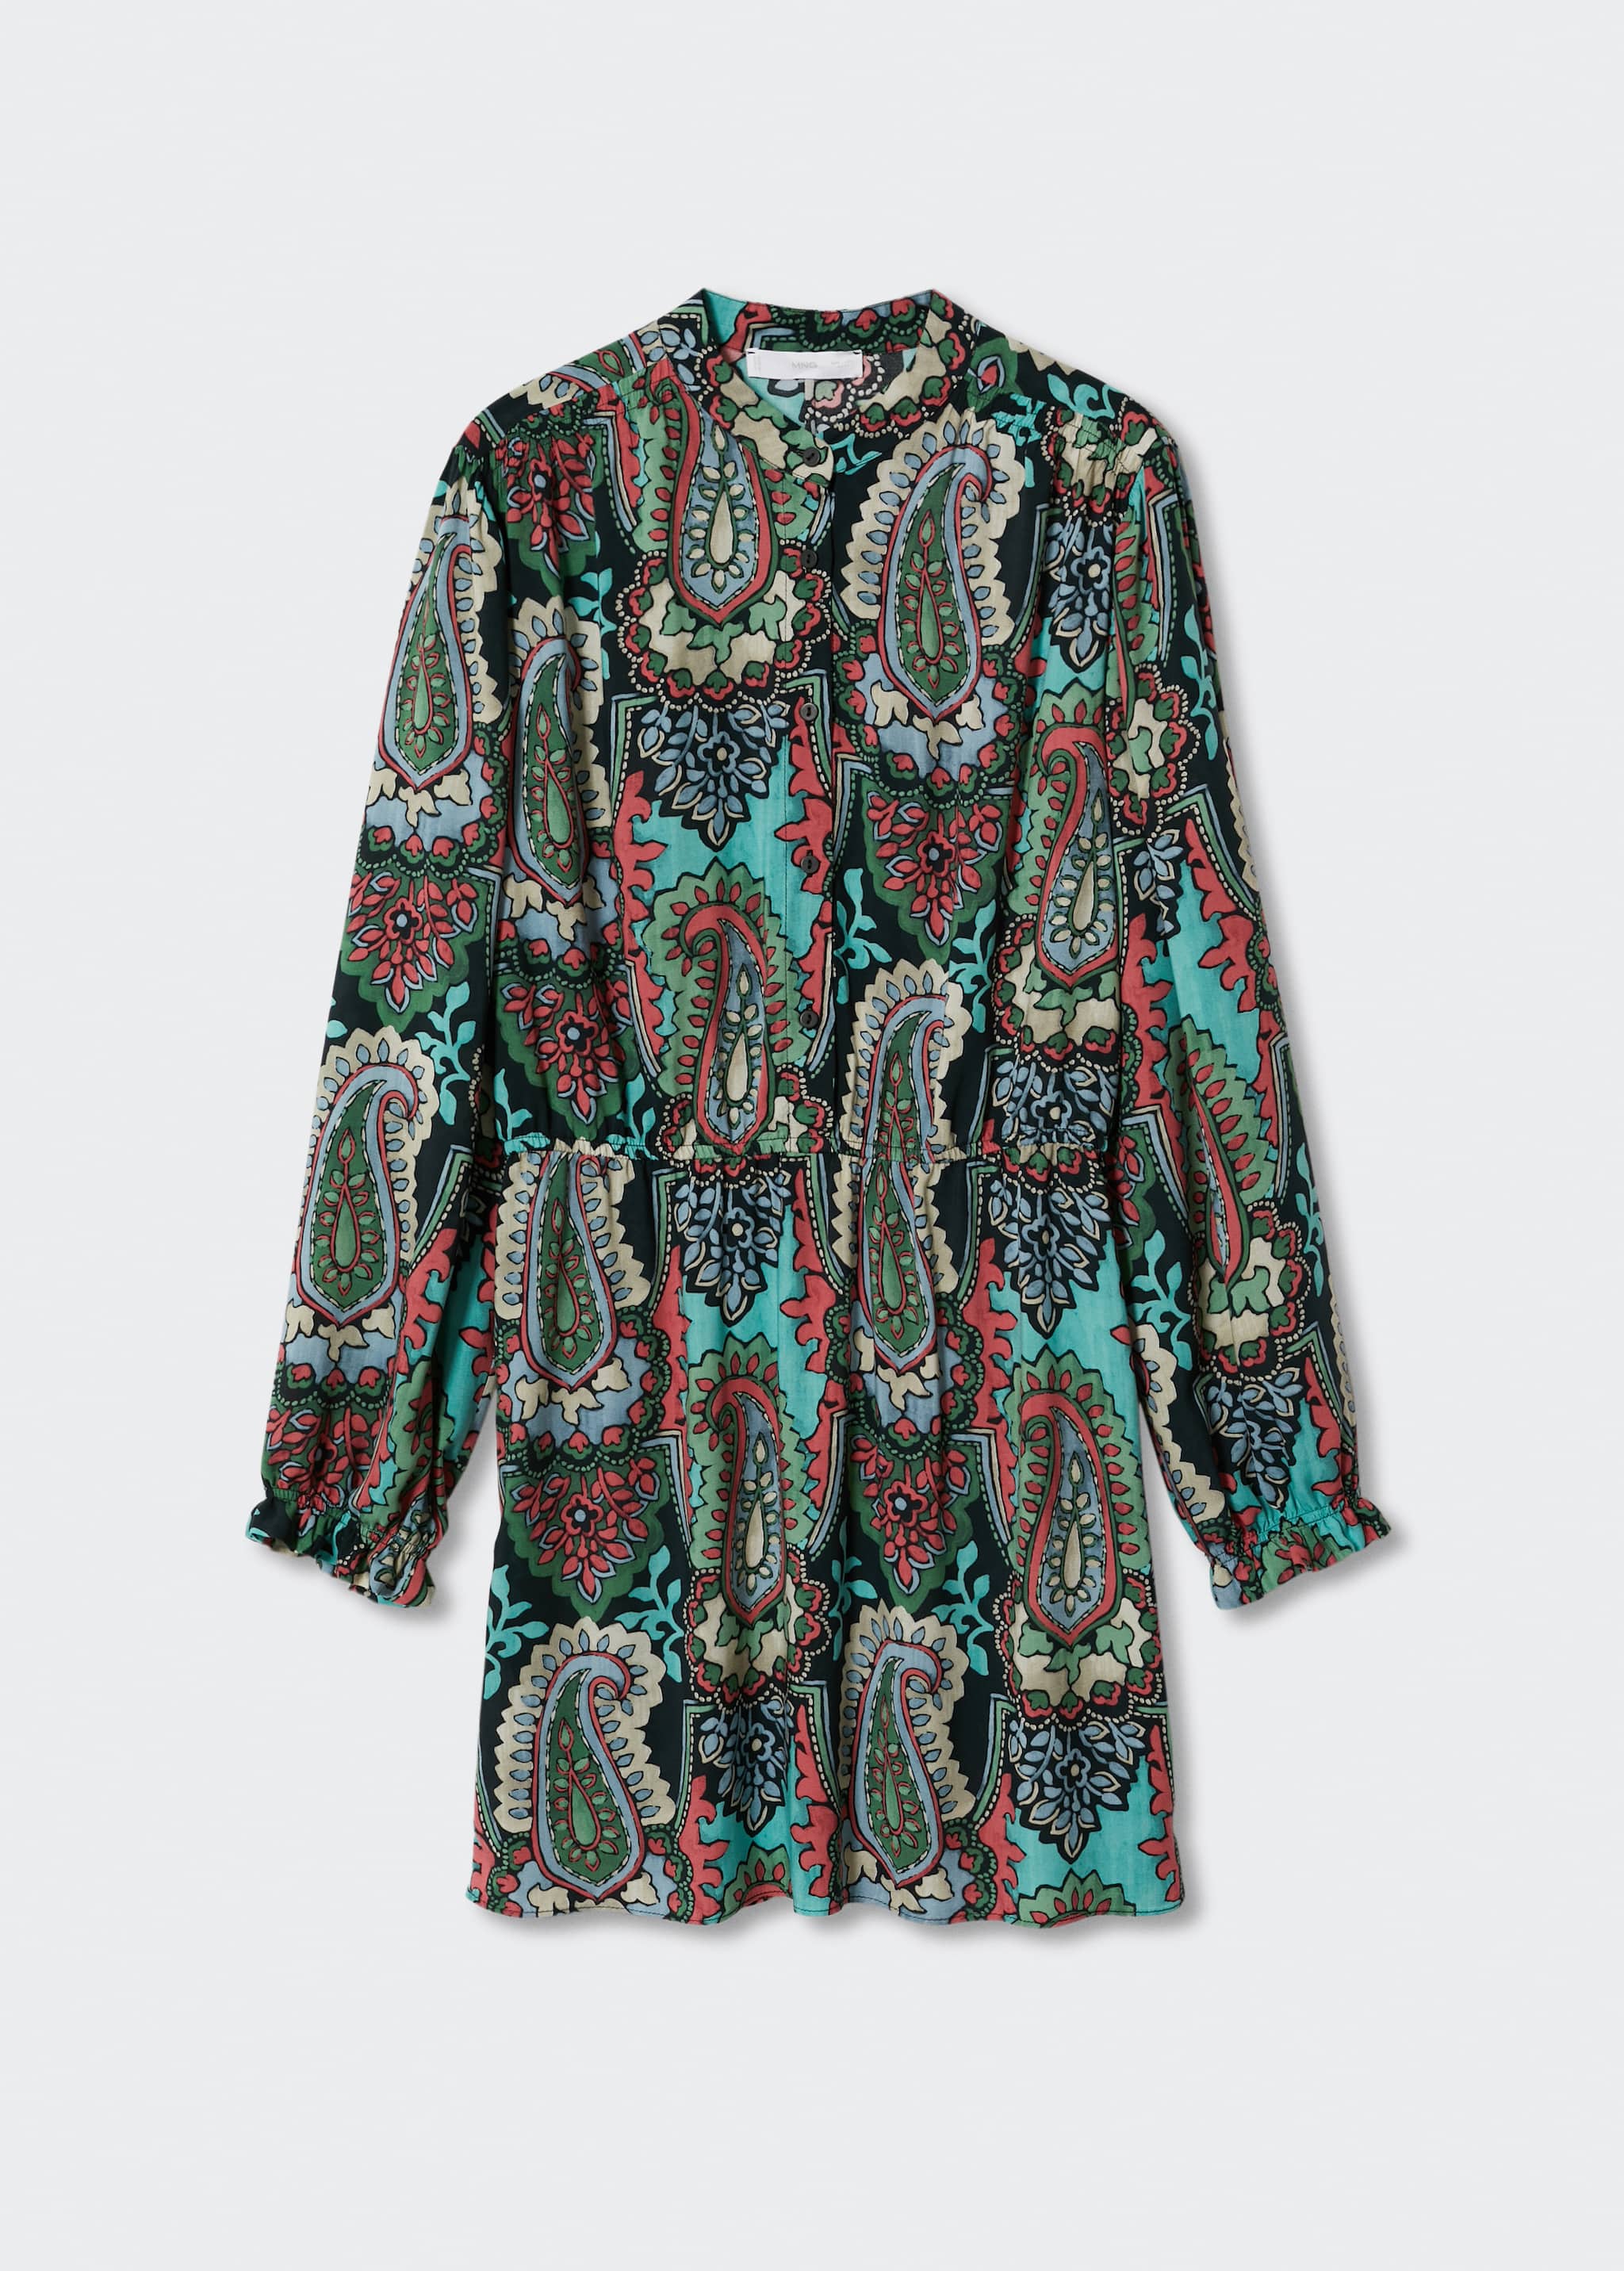 Paisley print dress - Article without model